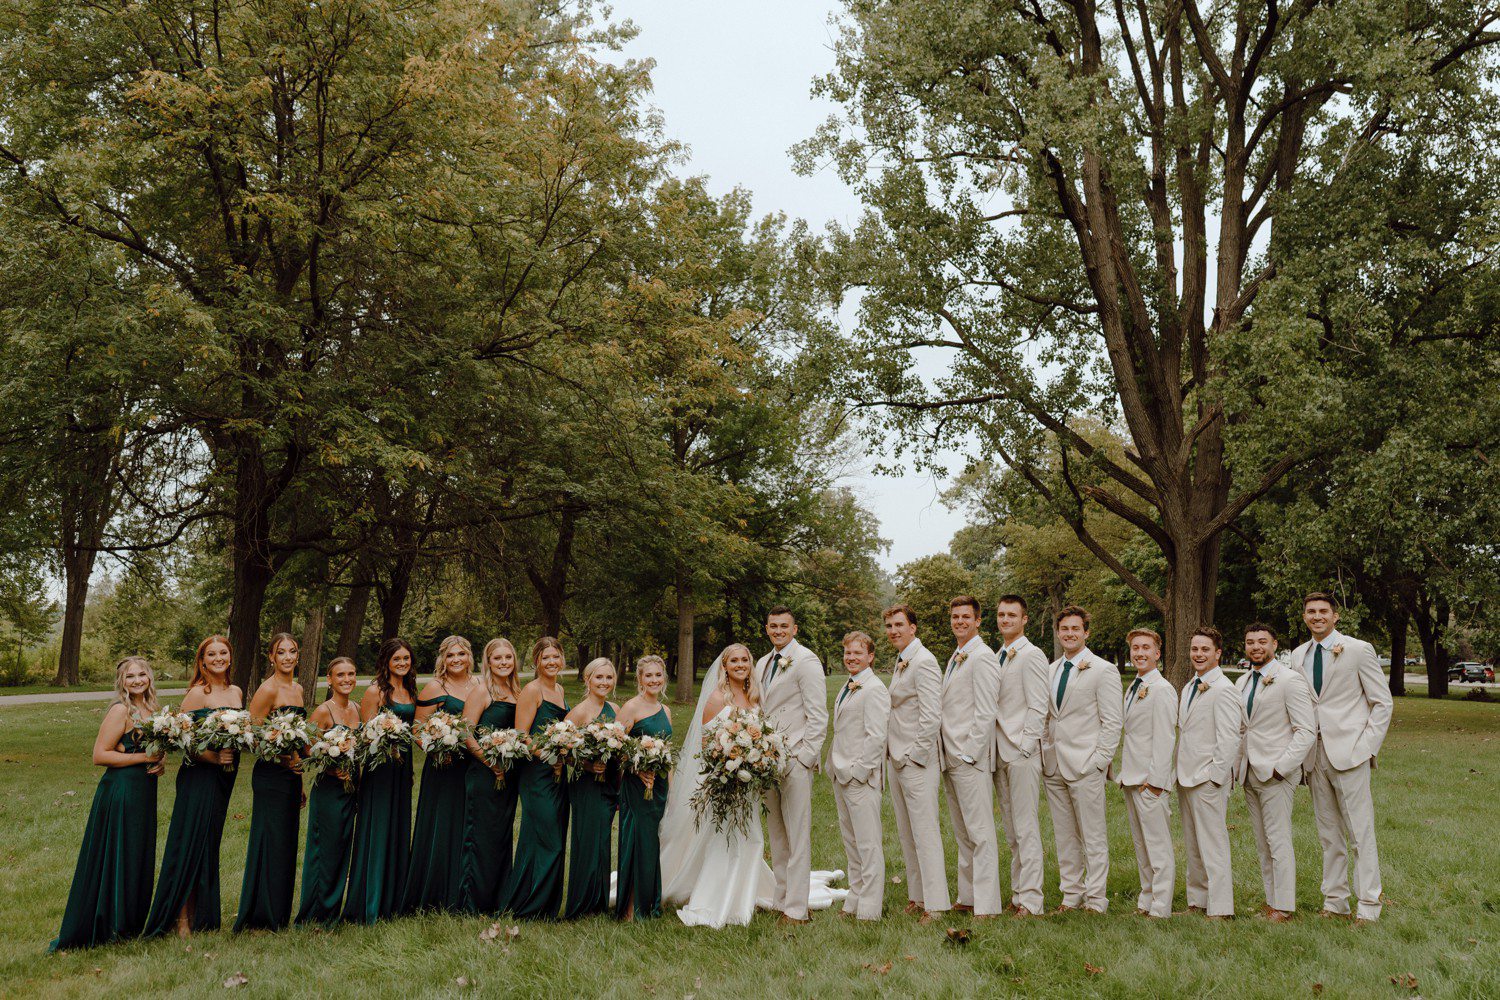 Wedding party photos with bridesmaids in dark green dresses and groomsmen in khaki.